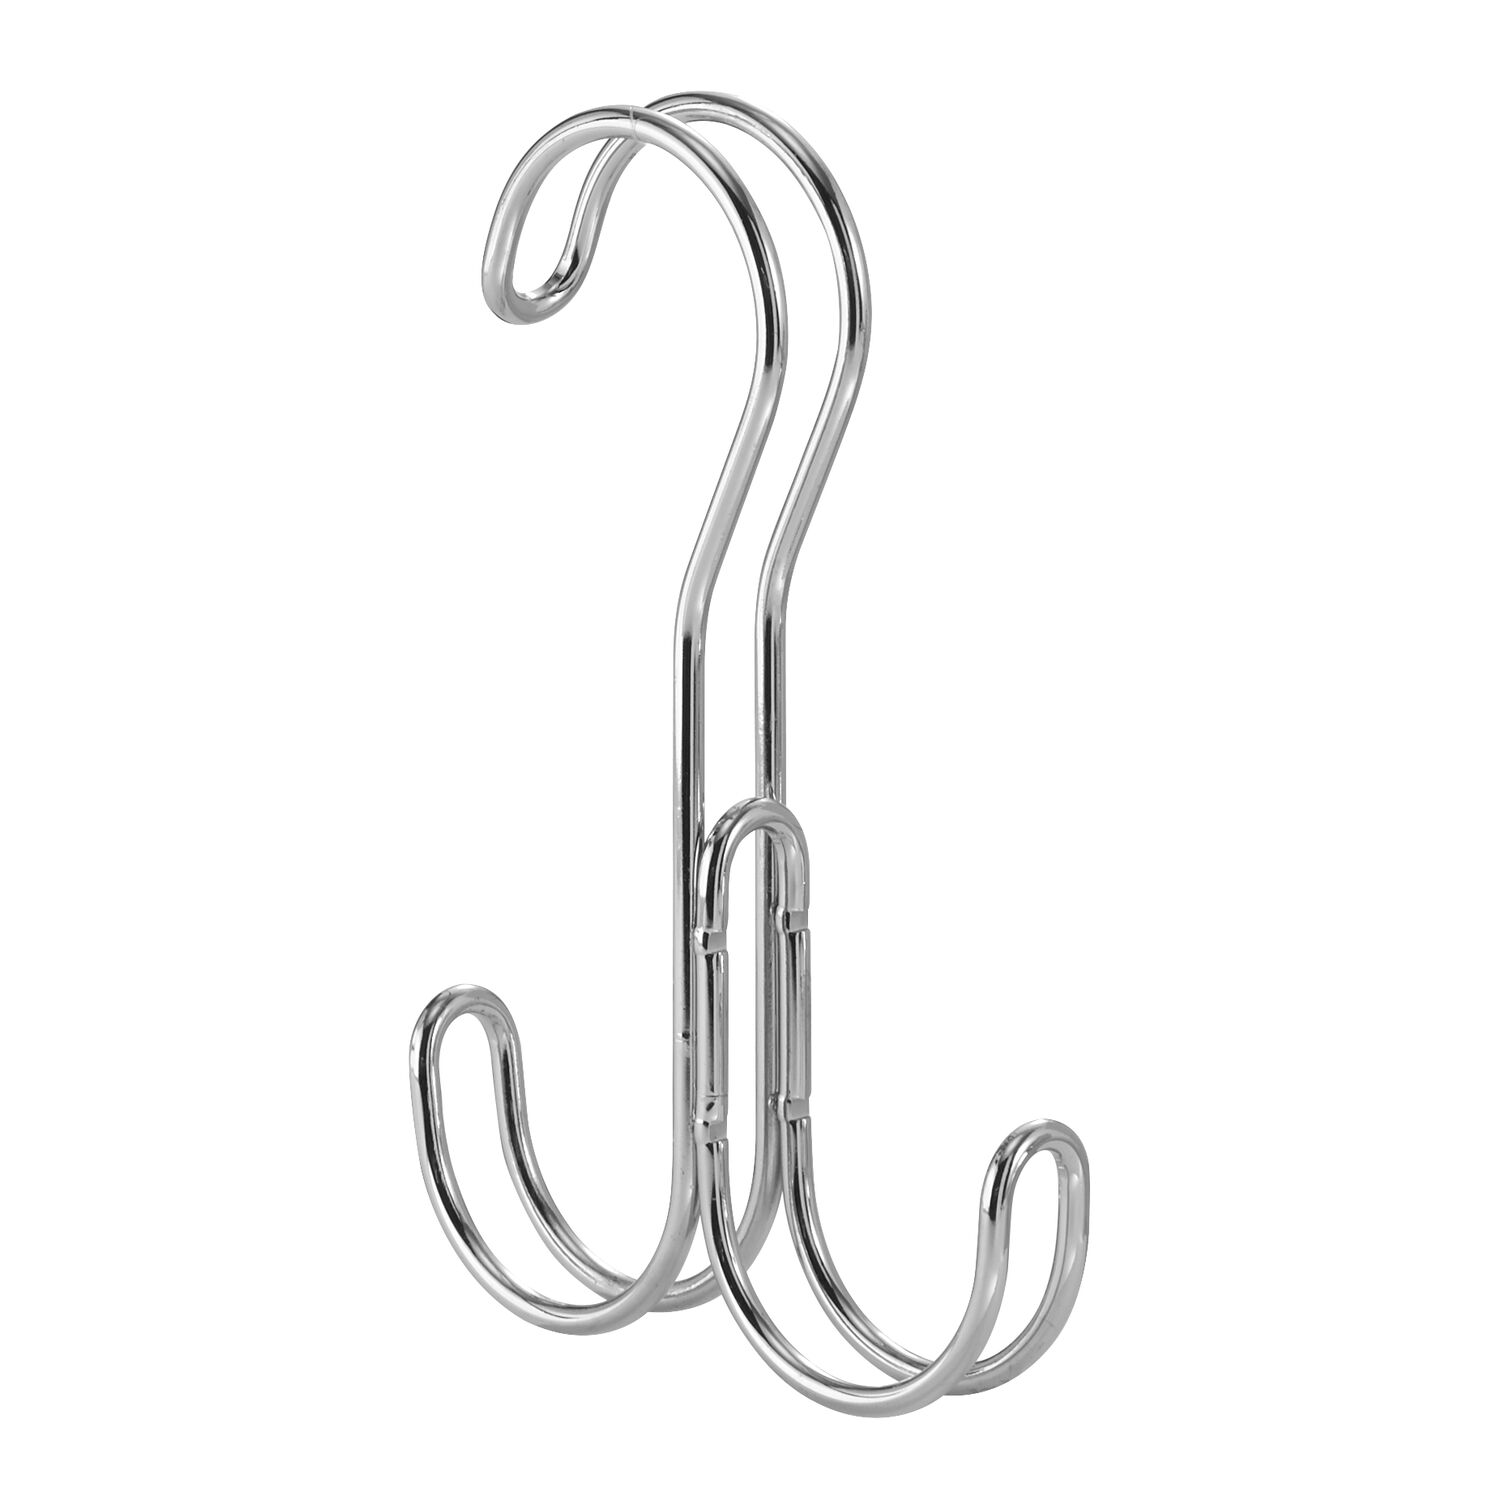 iDesign Classico MEtal over-the-Rod Hook with 2 Brackets, 3.8" x 6", Chrome - image 3 of 4